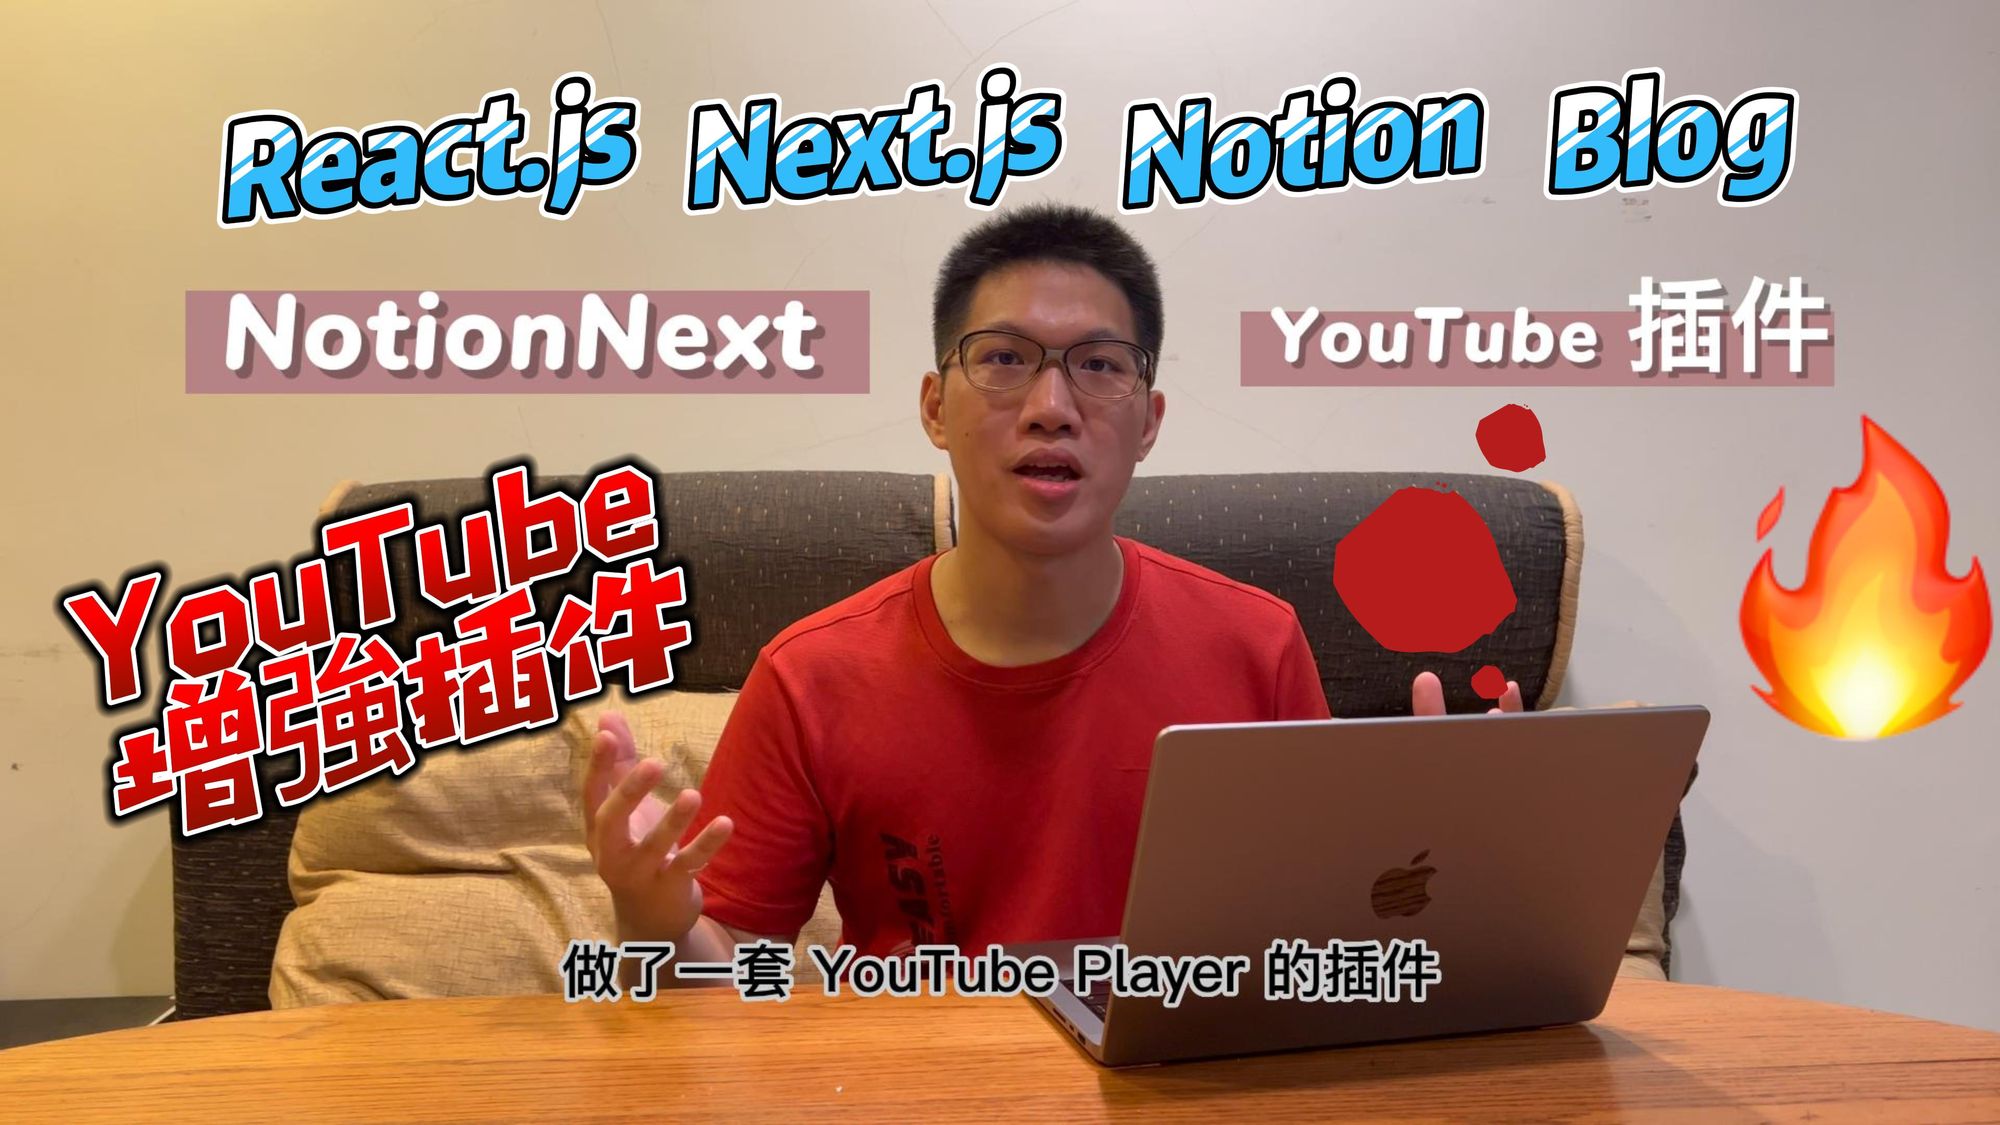 YouTube Player for NotionNext